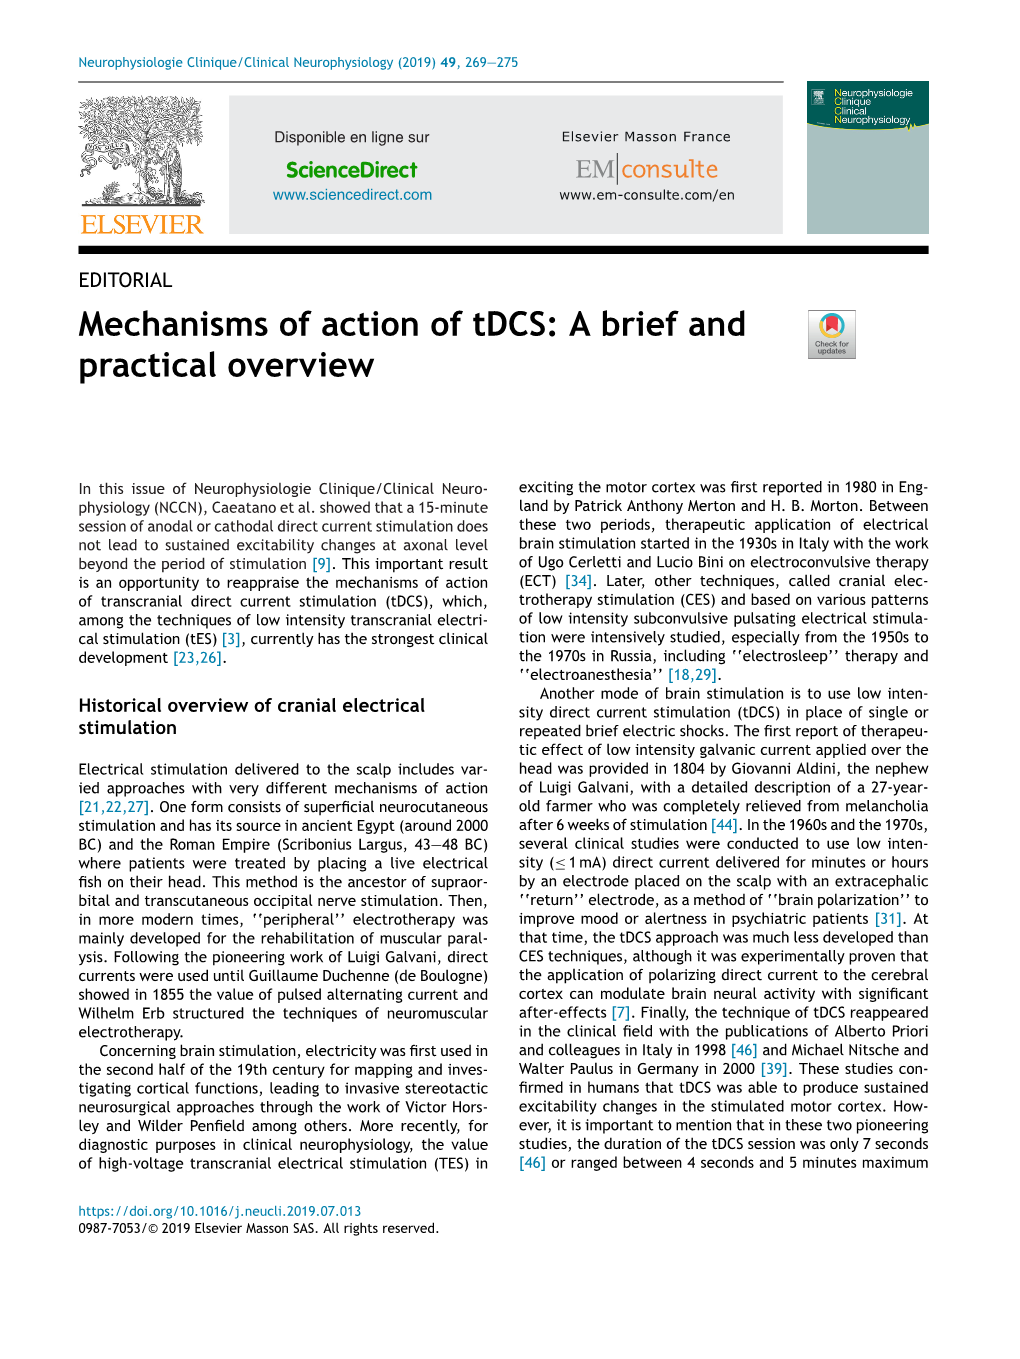 Mechanisms of Action of Tdcs: a Brief and Practical Overview 271